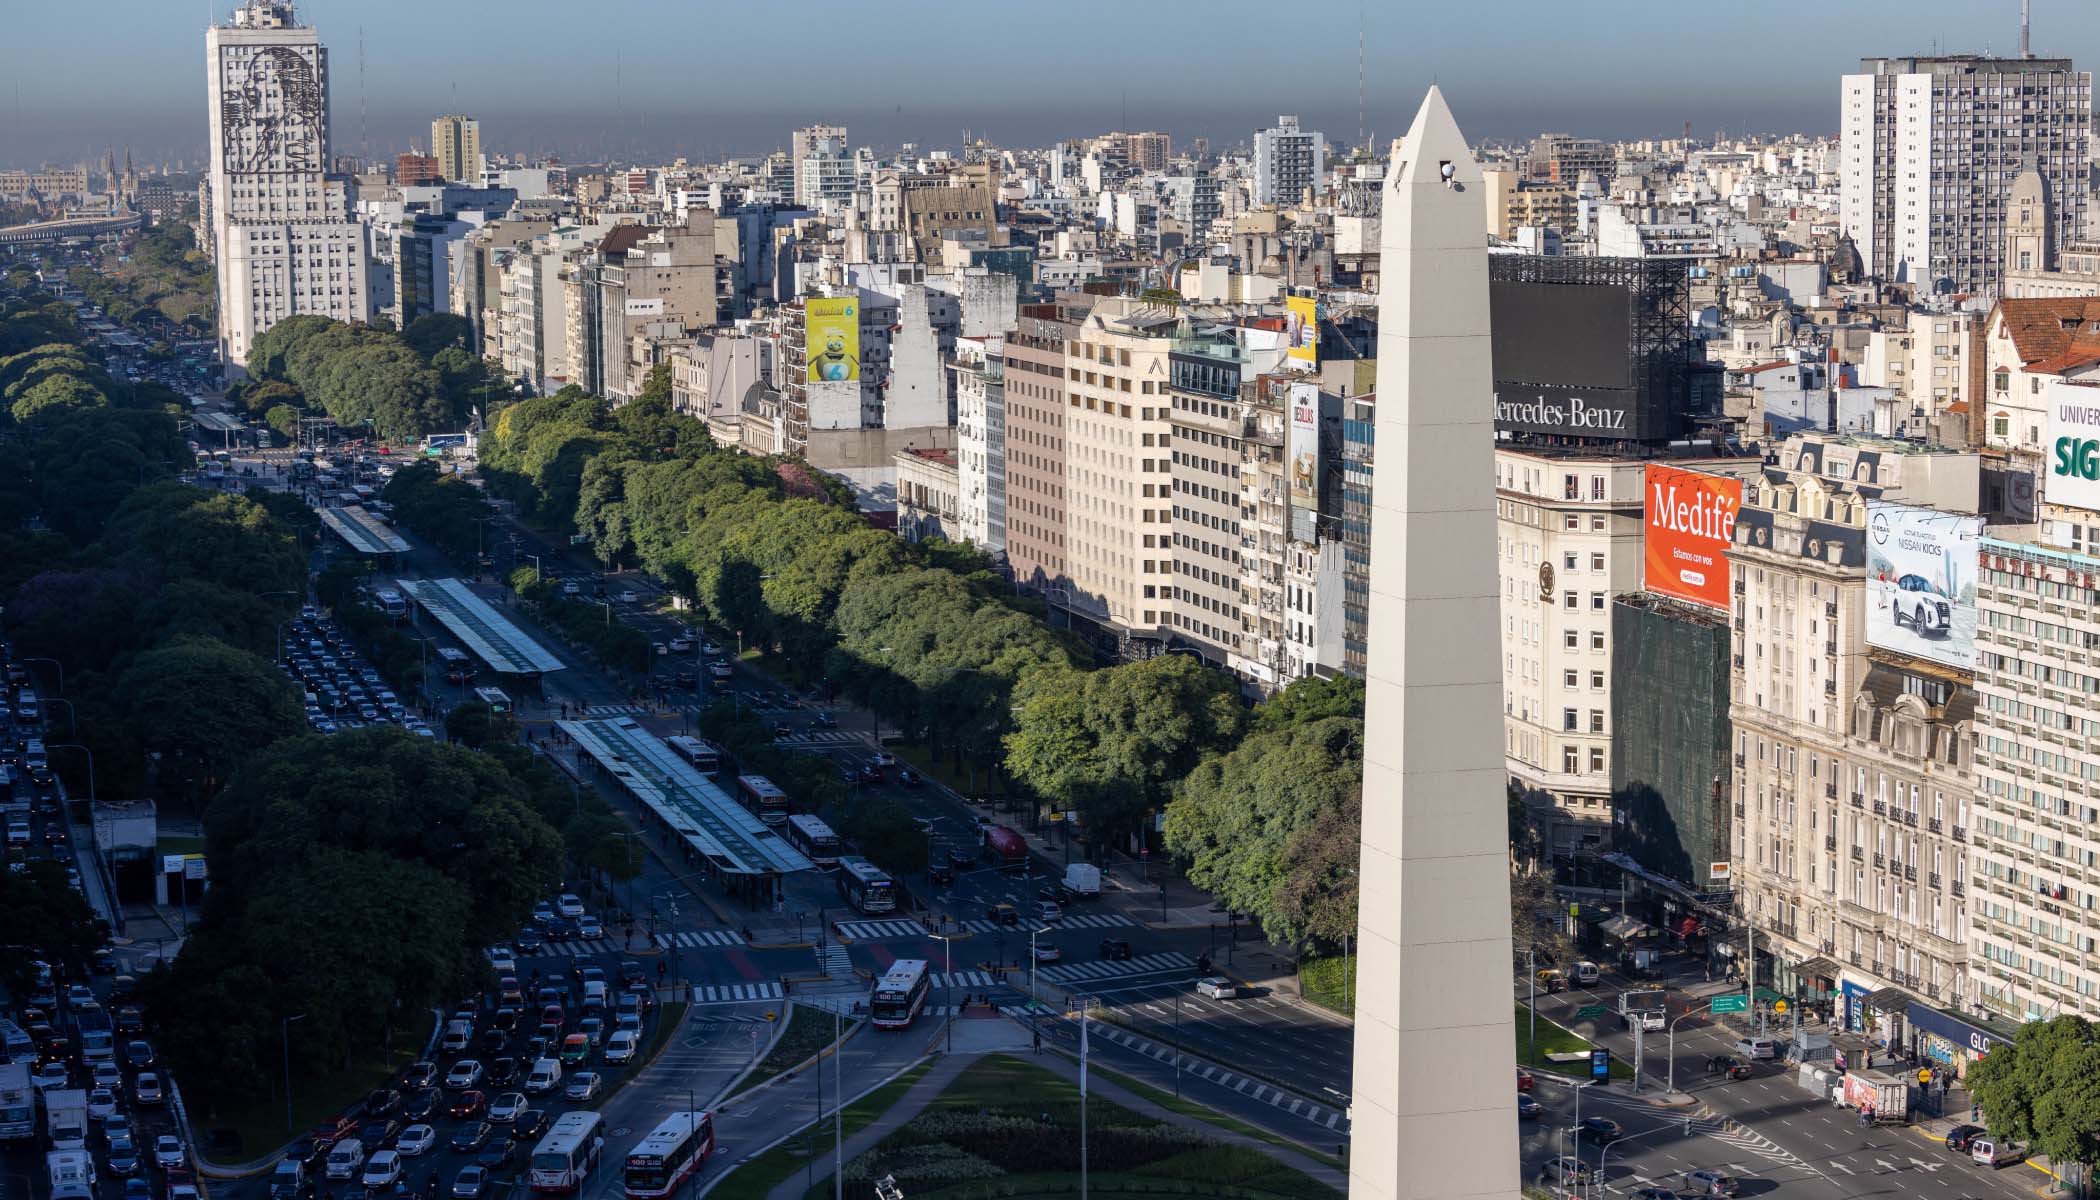 A landscape in Buenos Aires, Argentina, showing many buildings and an obelisk monument called the Obelisco de Buenos Aires.